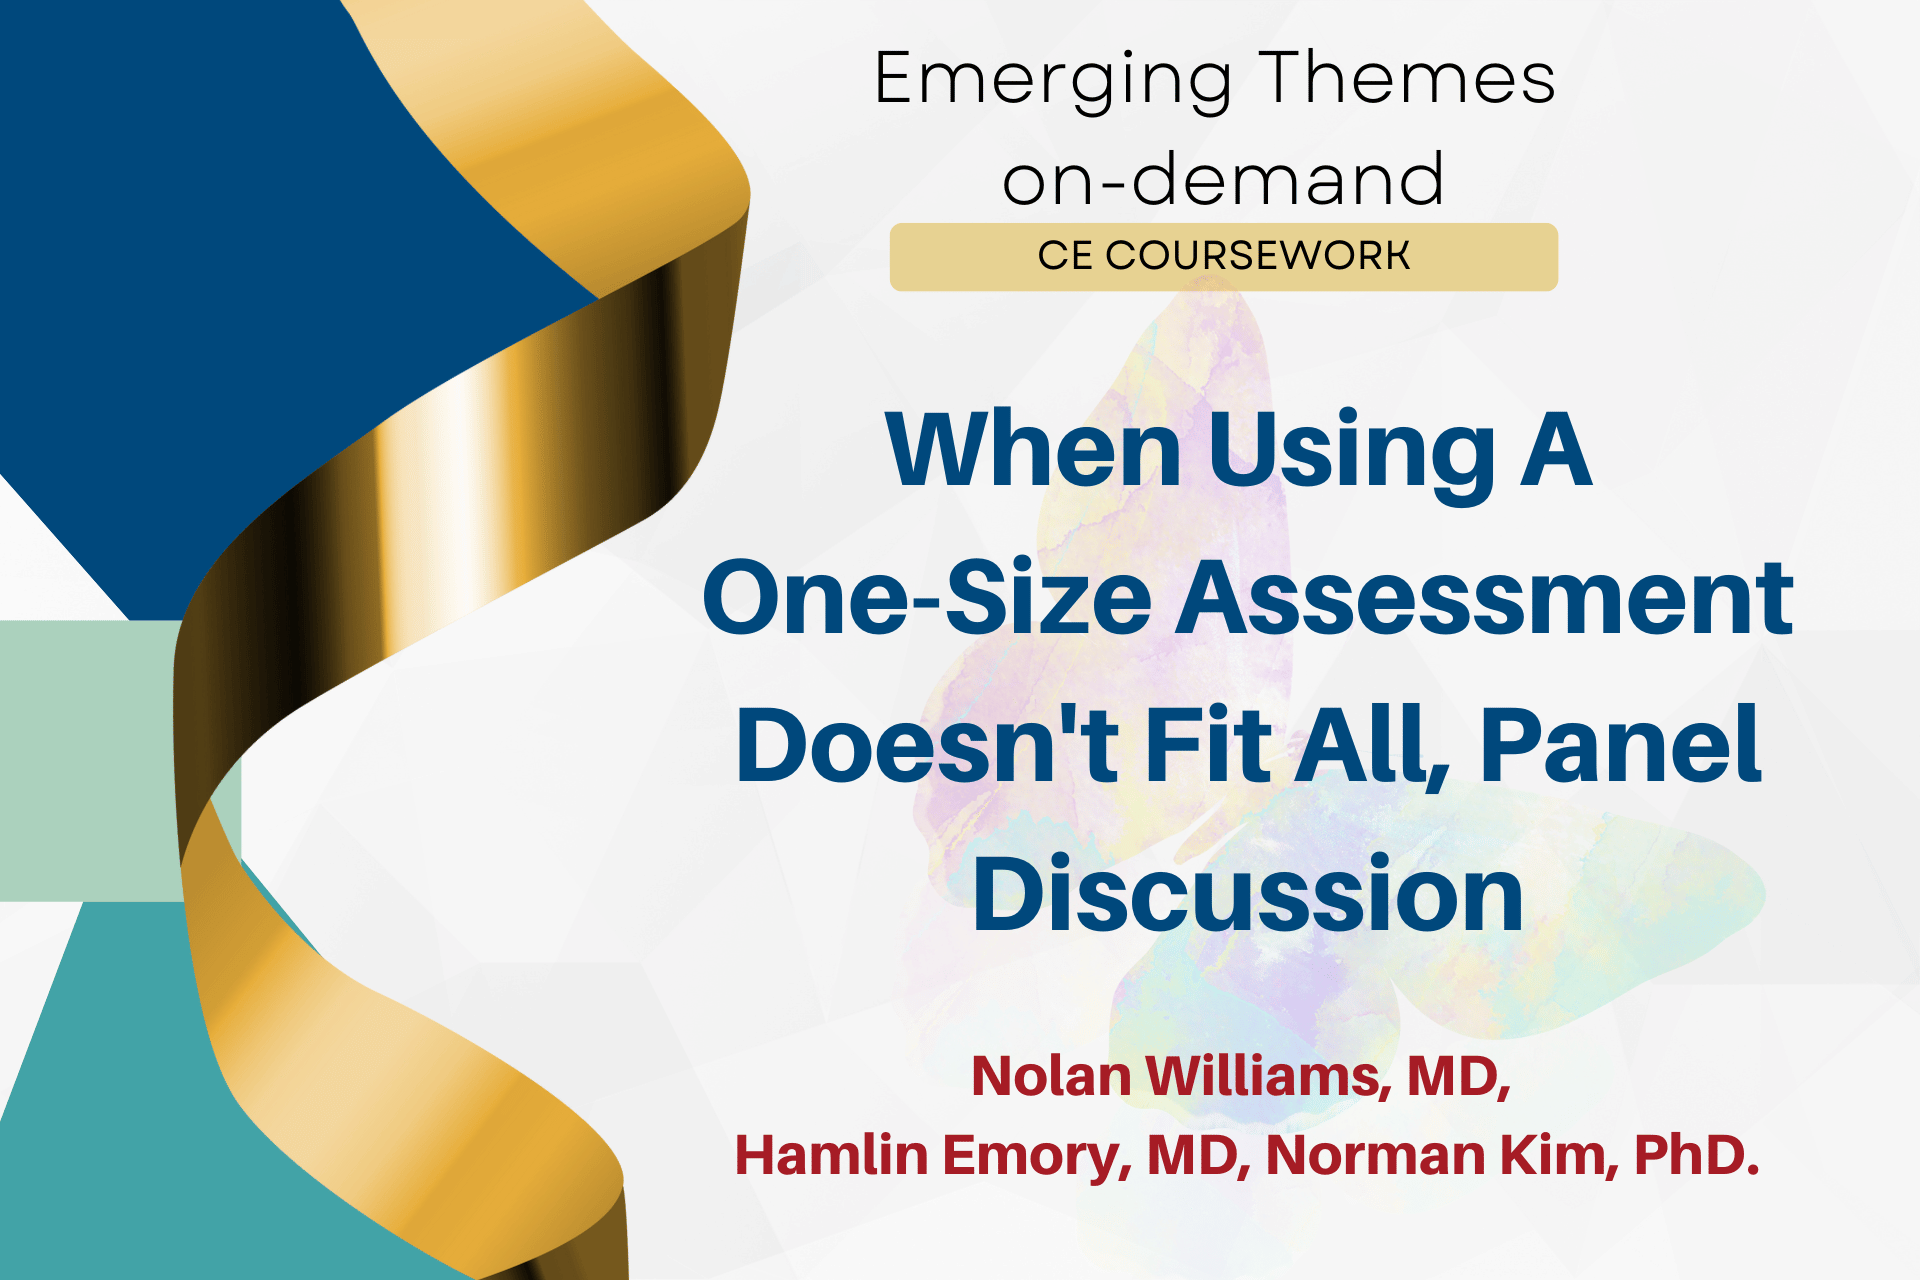 When a One Size Assessment does not fit all